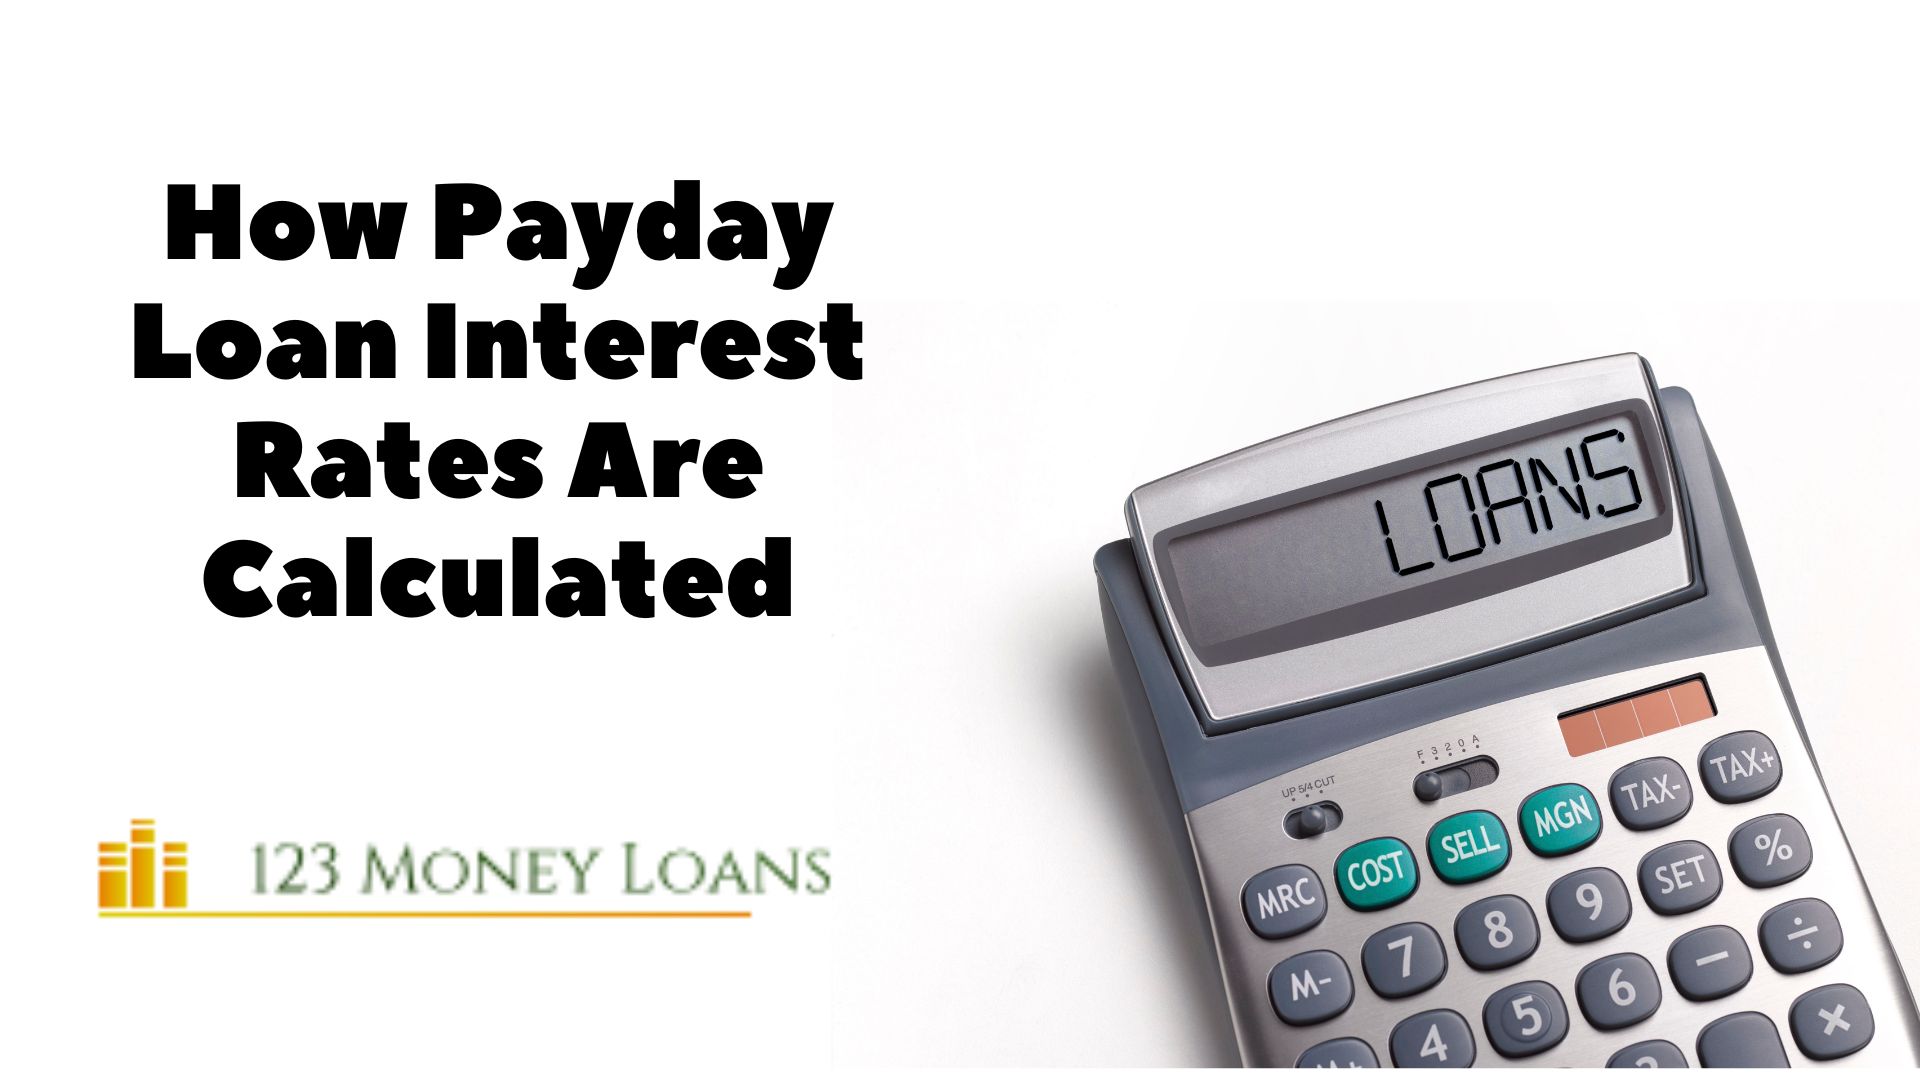 How Payday Loan Interest Rates Are Calculated - 123moneyloans